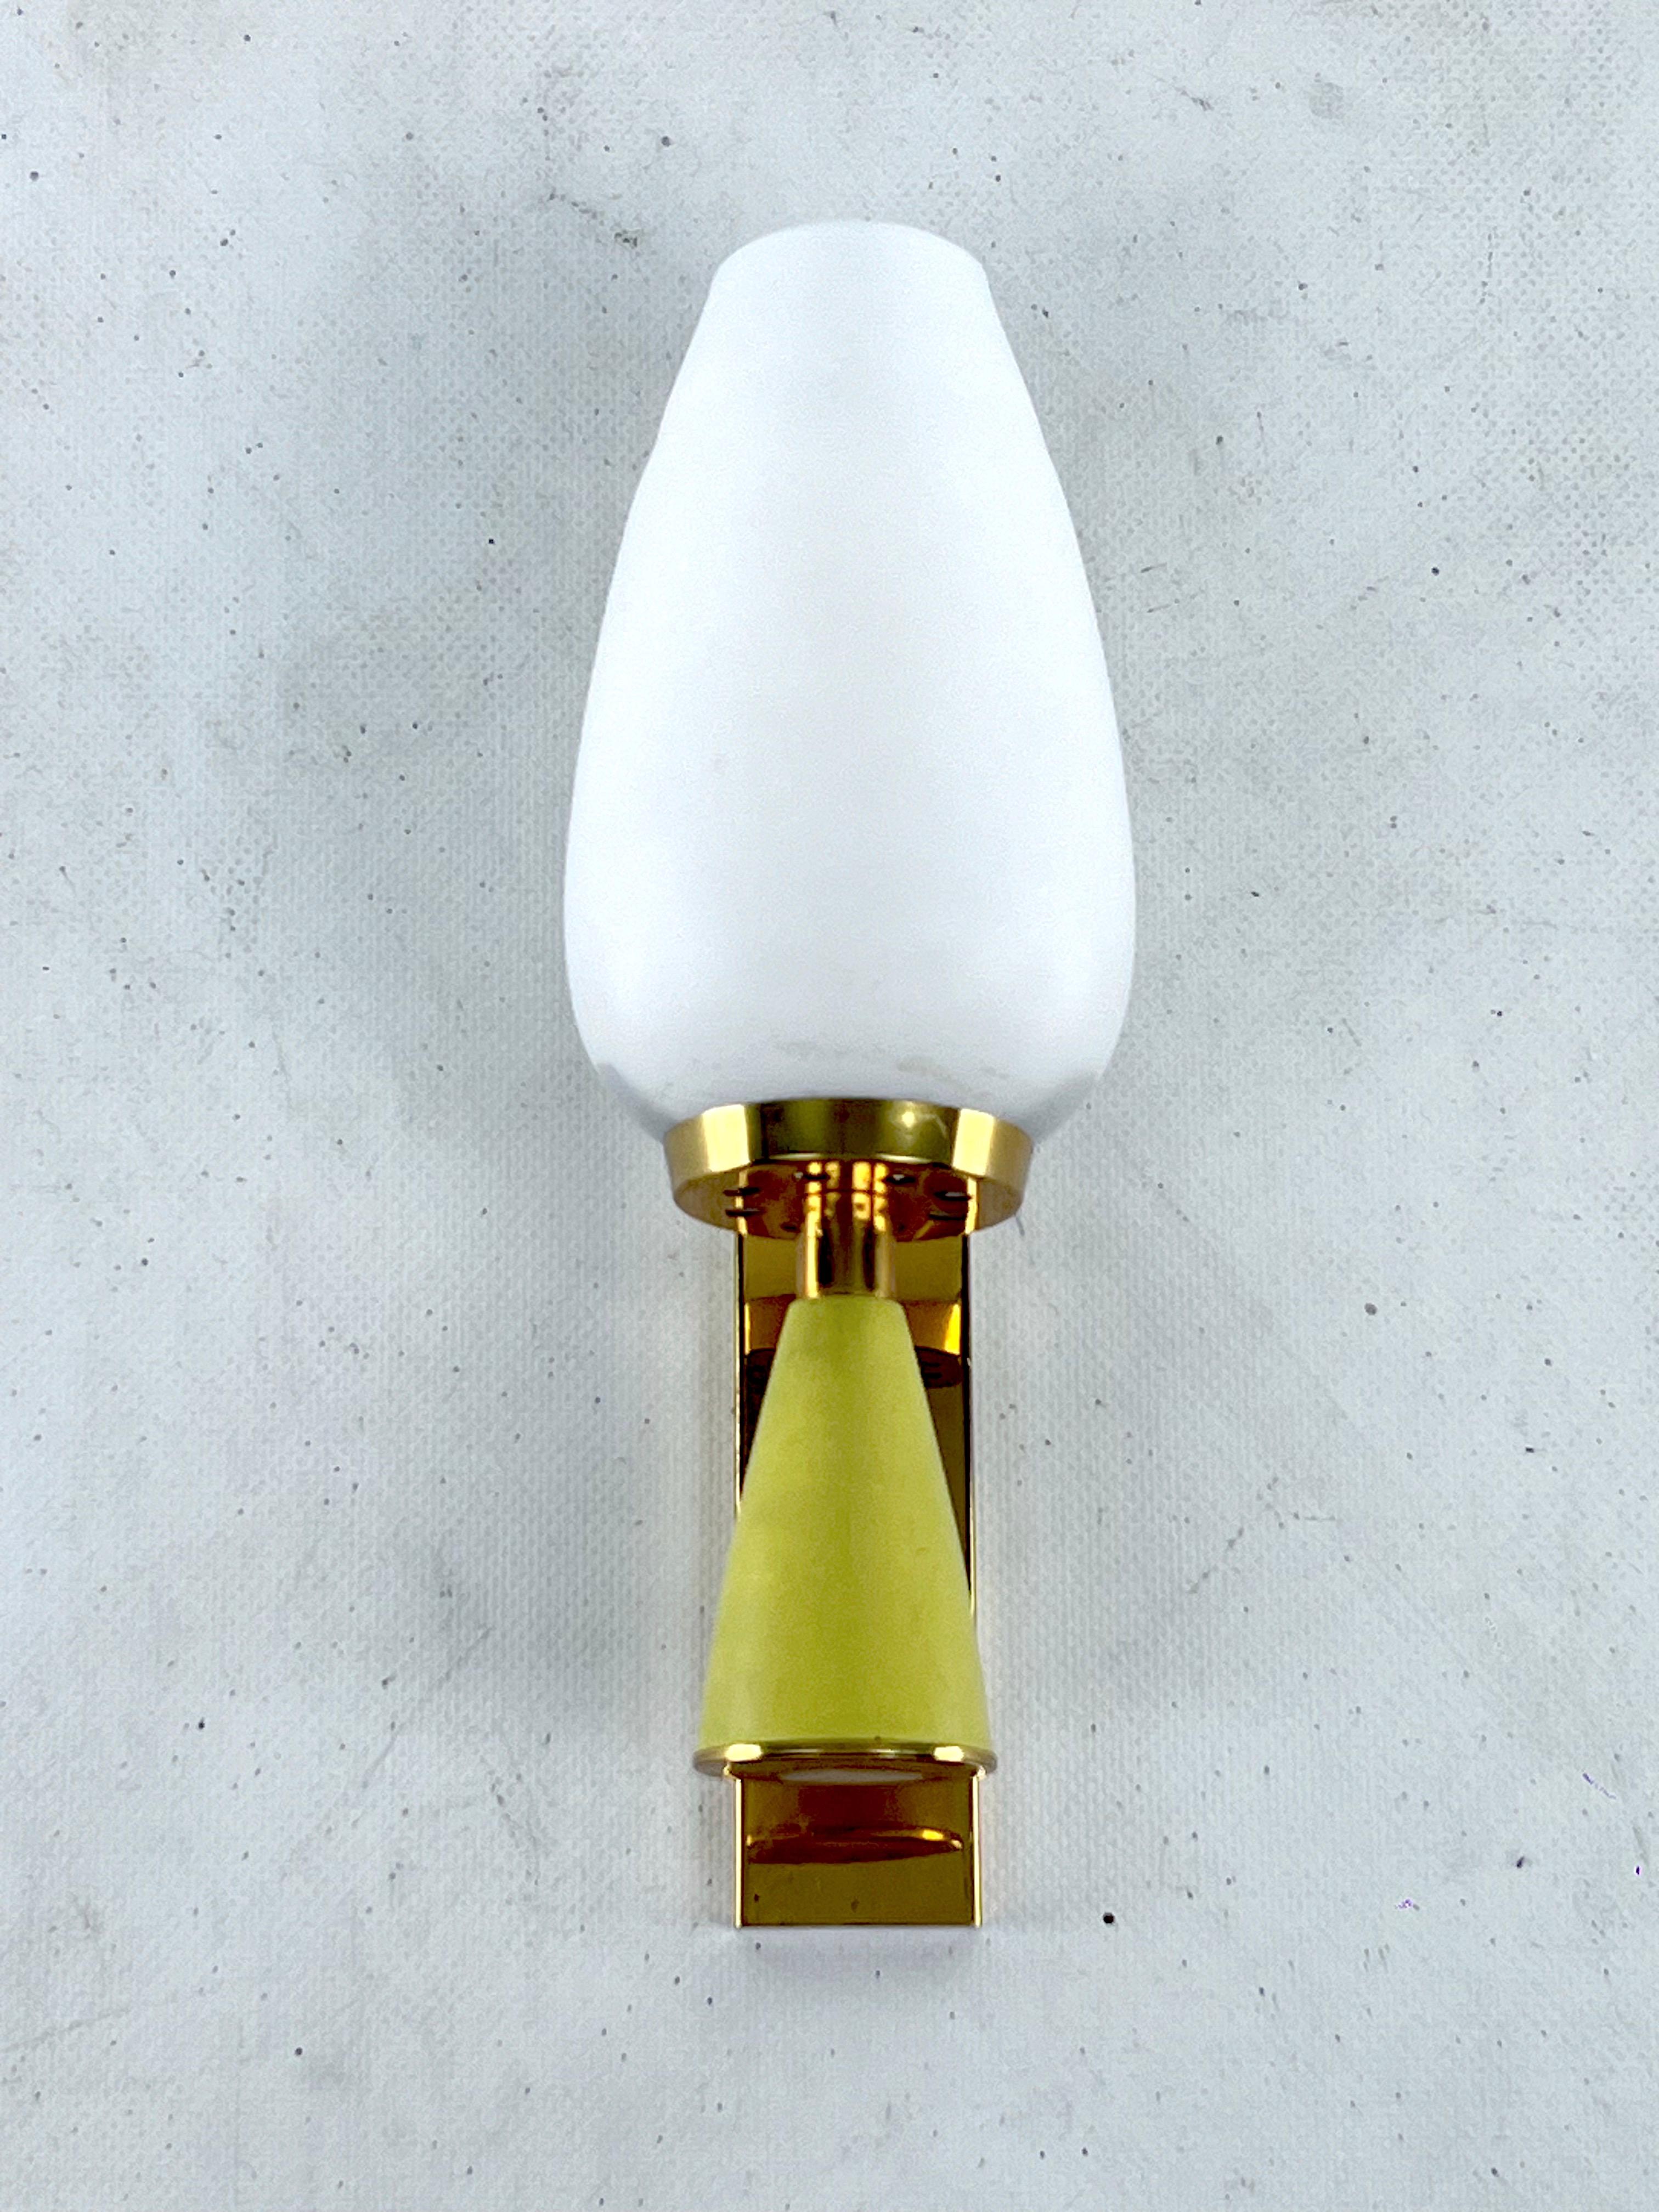 Reminiscent of Stilnovo manner, this sconce was produced in italy during the 50s. Made from brass, lacquer and opaline glass. Trace of age and use. Full working with EU standard, adaptable on demand for USA standard.